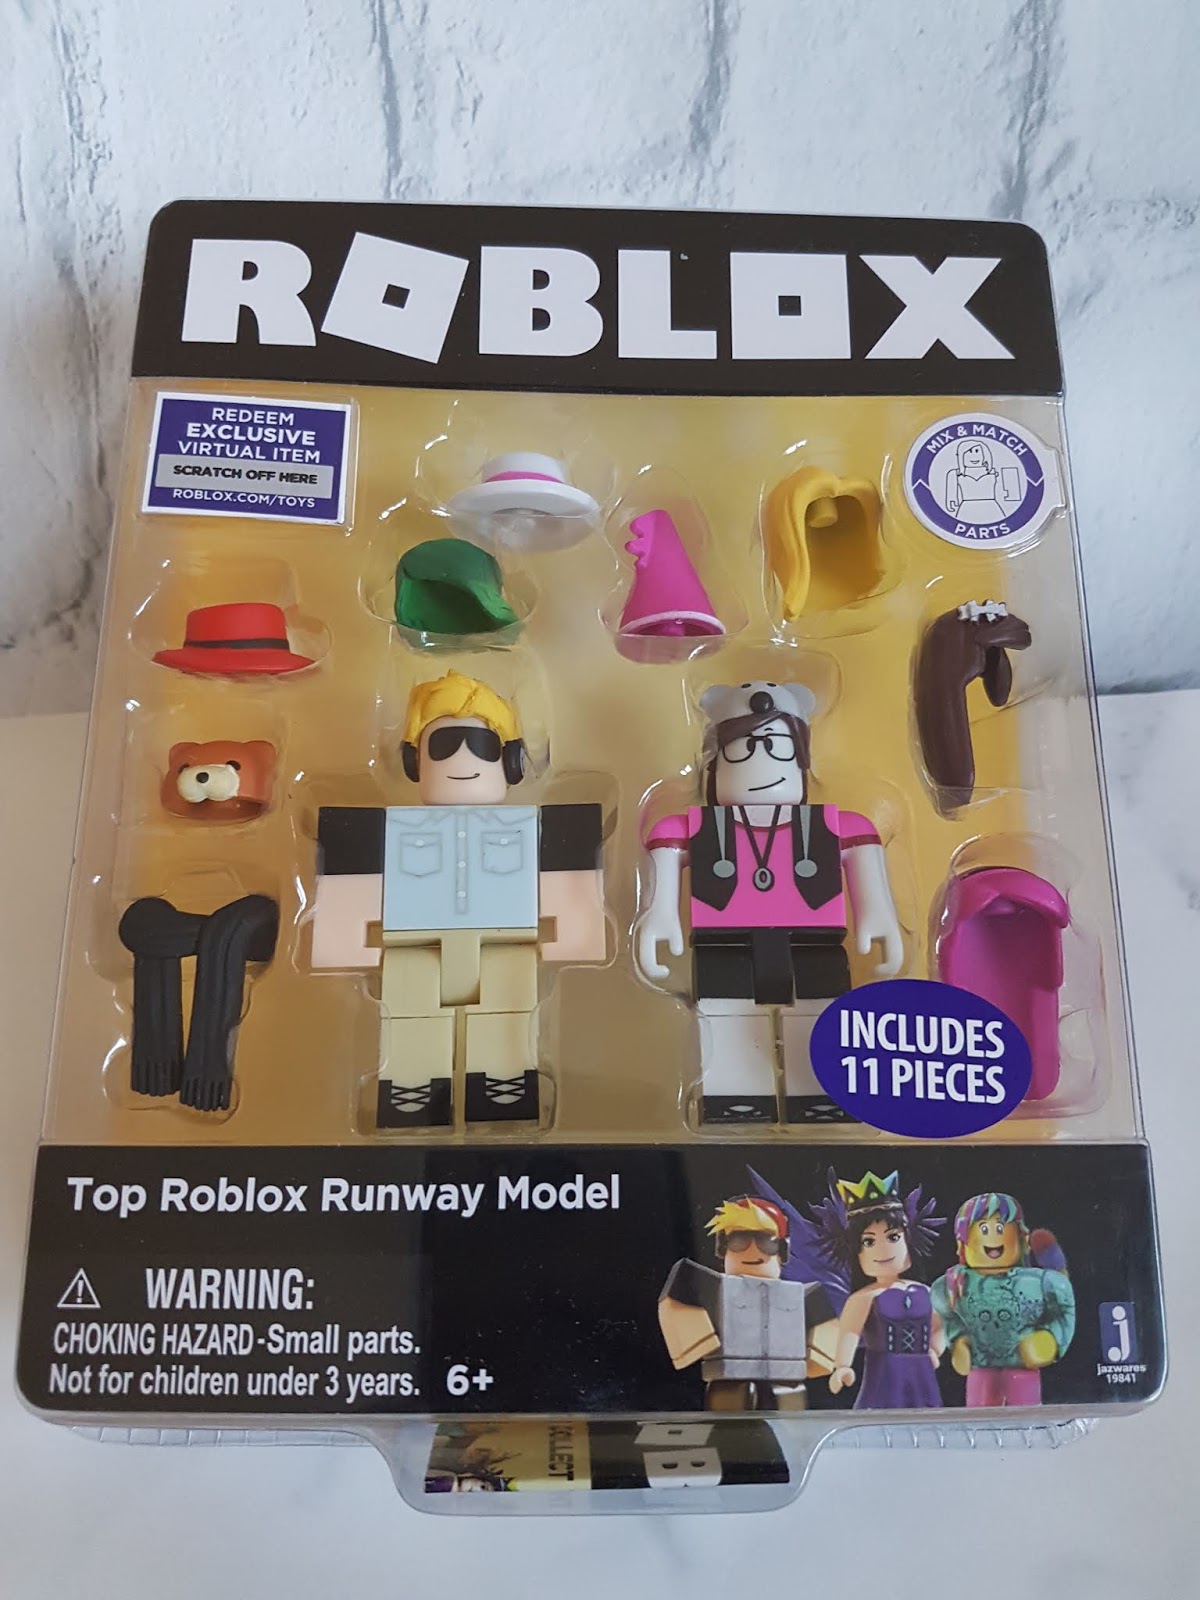 Mummy Of 3 Diaries Roblox Celebrity Series 1 Review - details about roblox celebrity collection exclusive figure 12 pack set